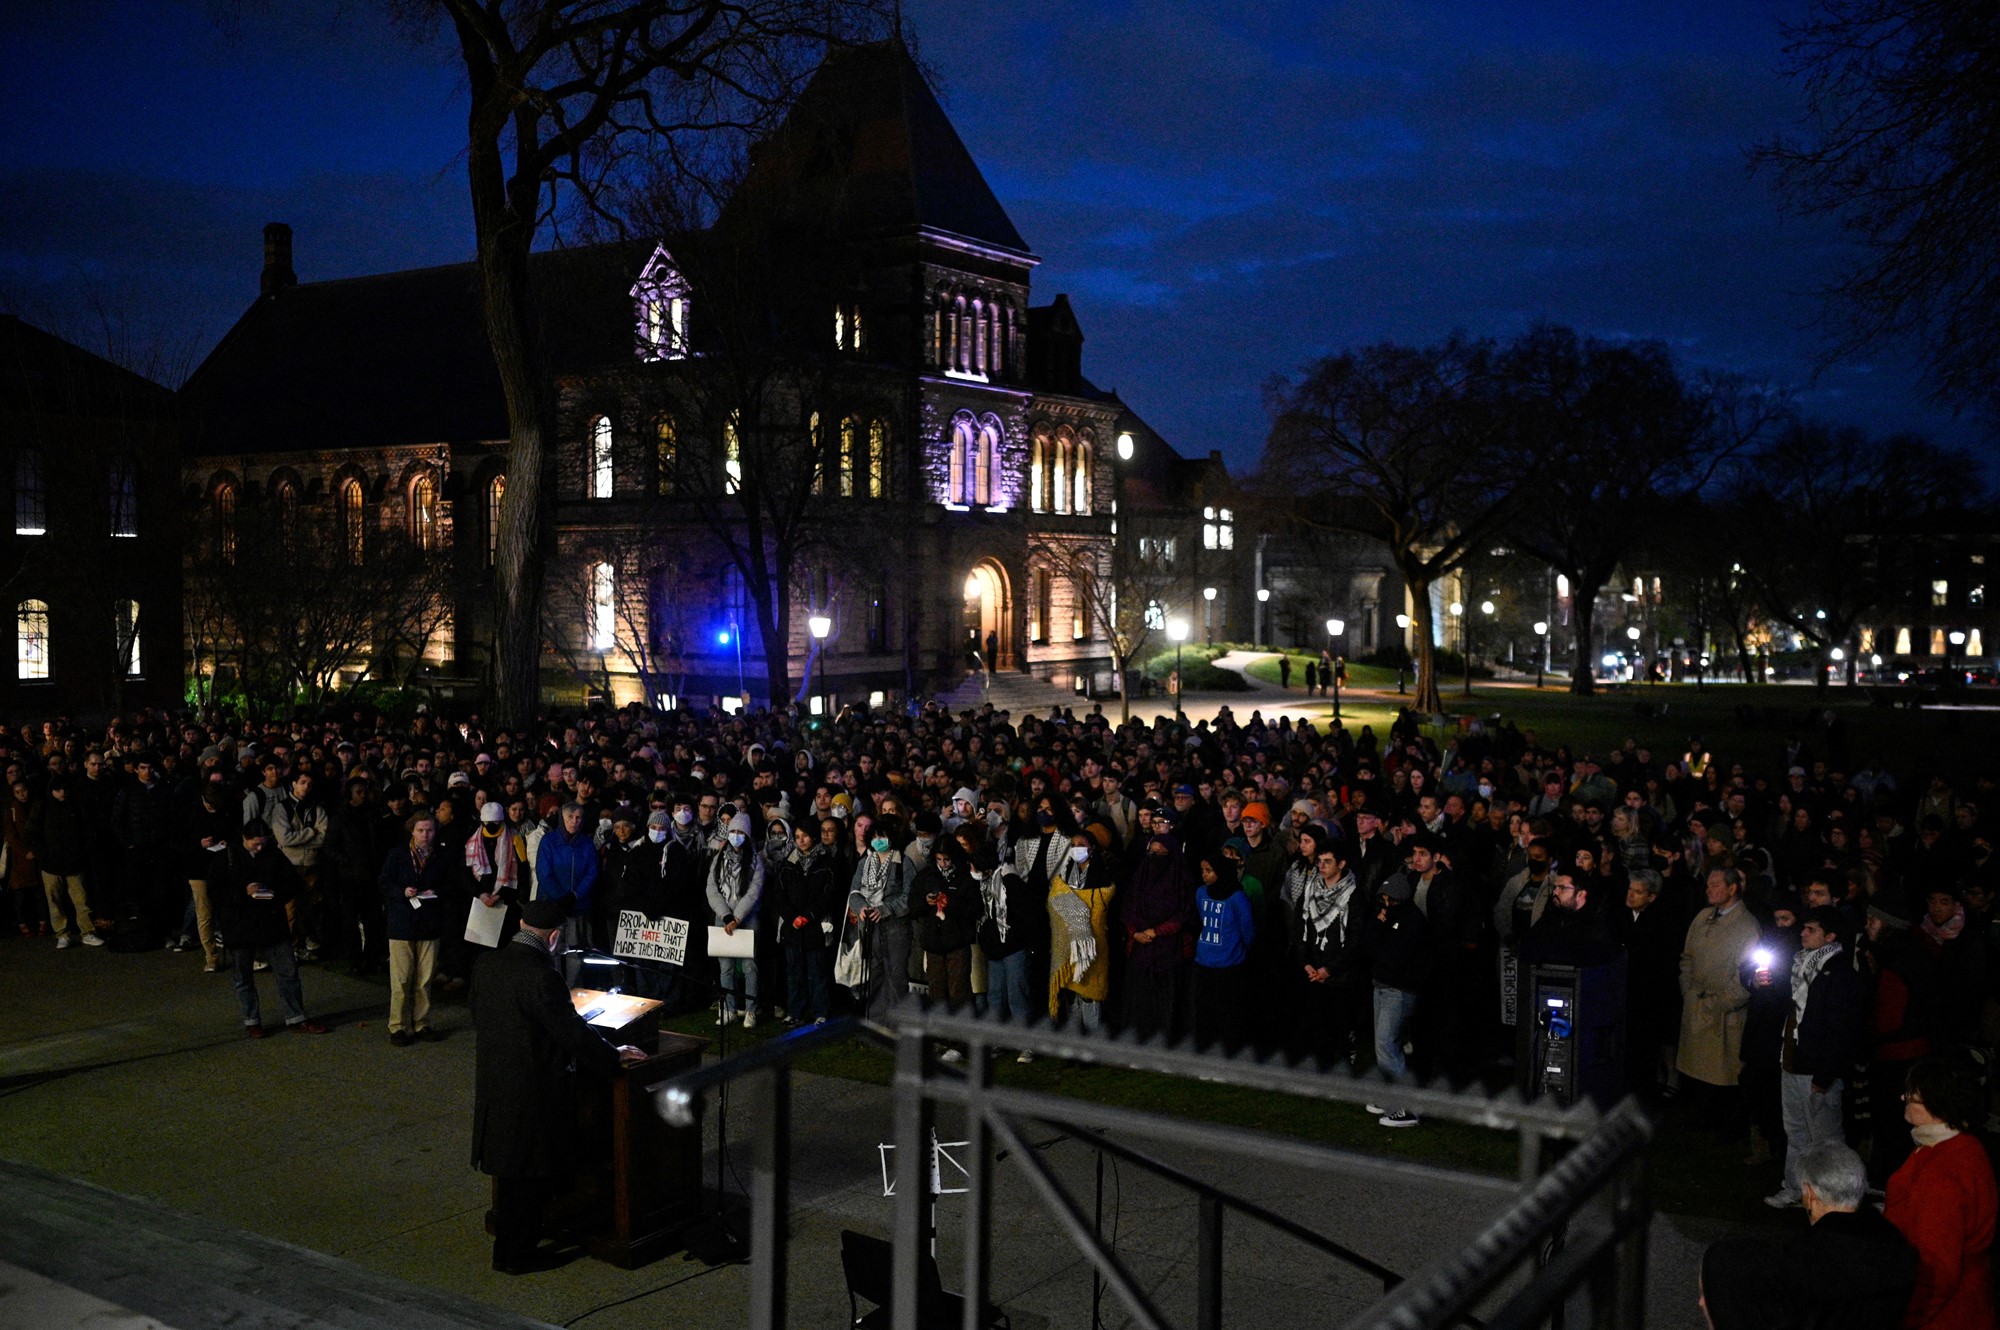 A group of students in the dark holding candles